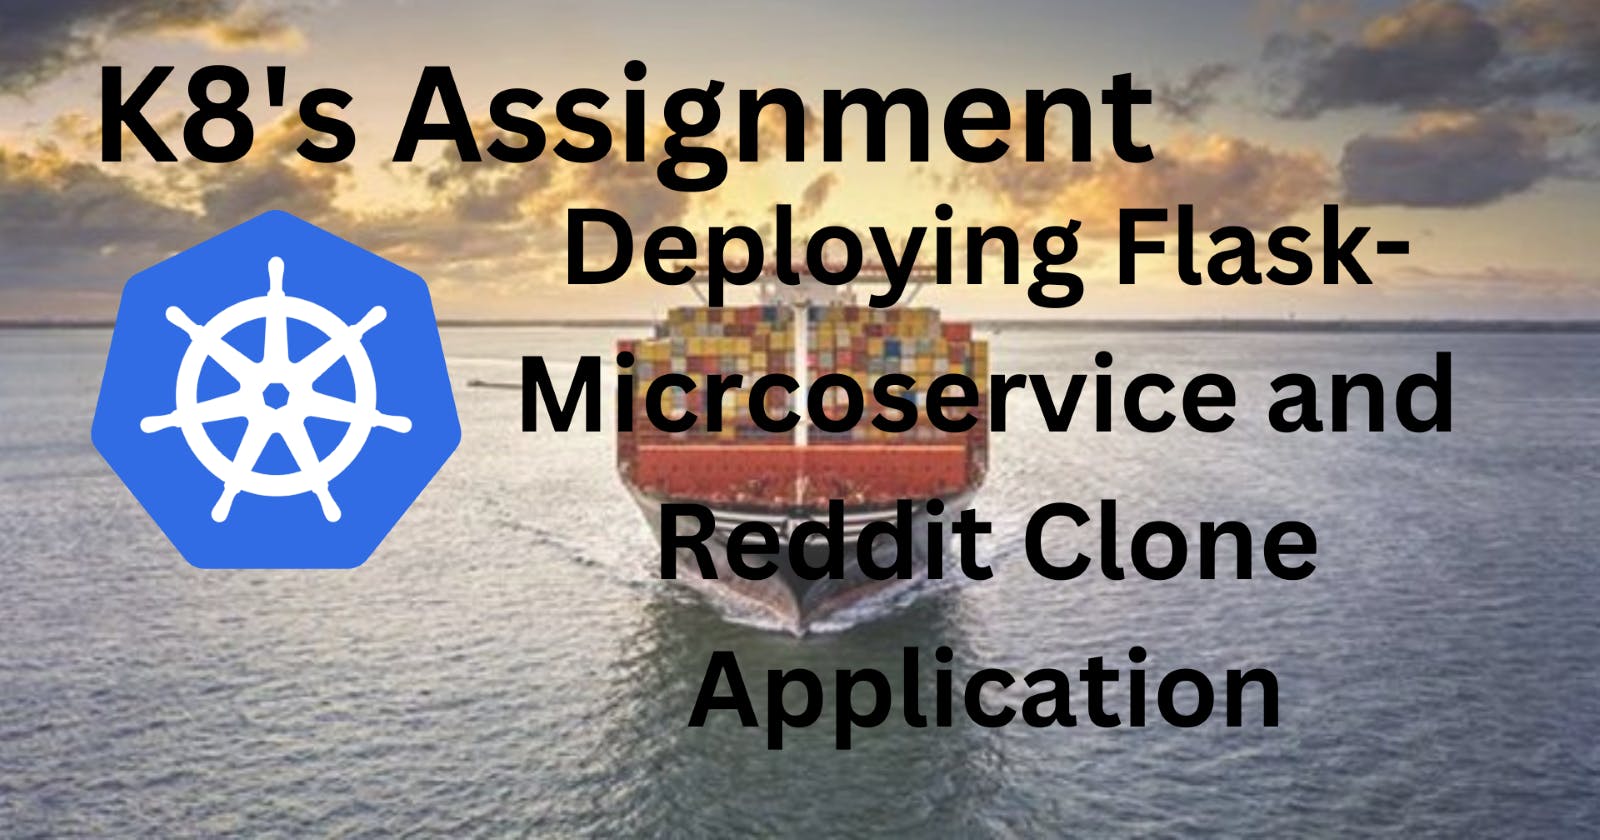 K8's Assignment Deploying Flask-Microservices and Reddit Clone Application